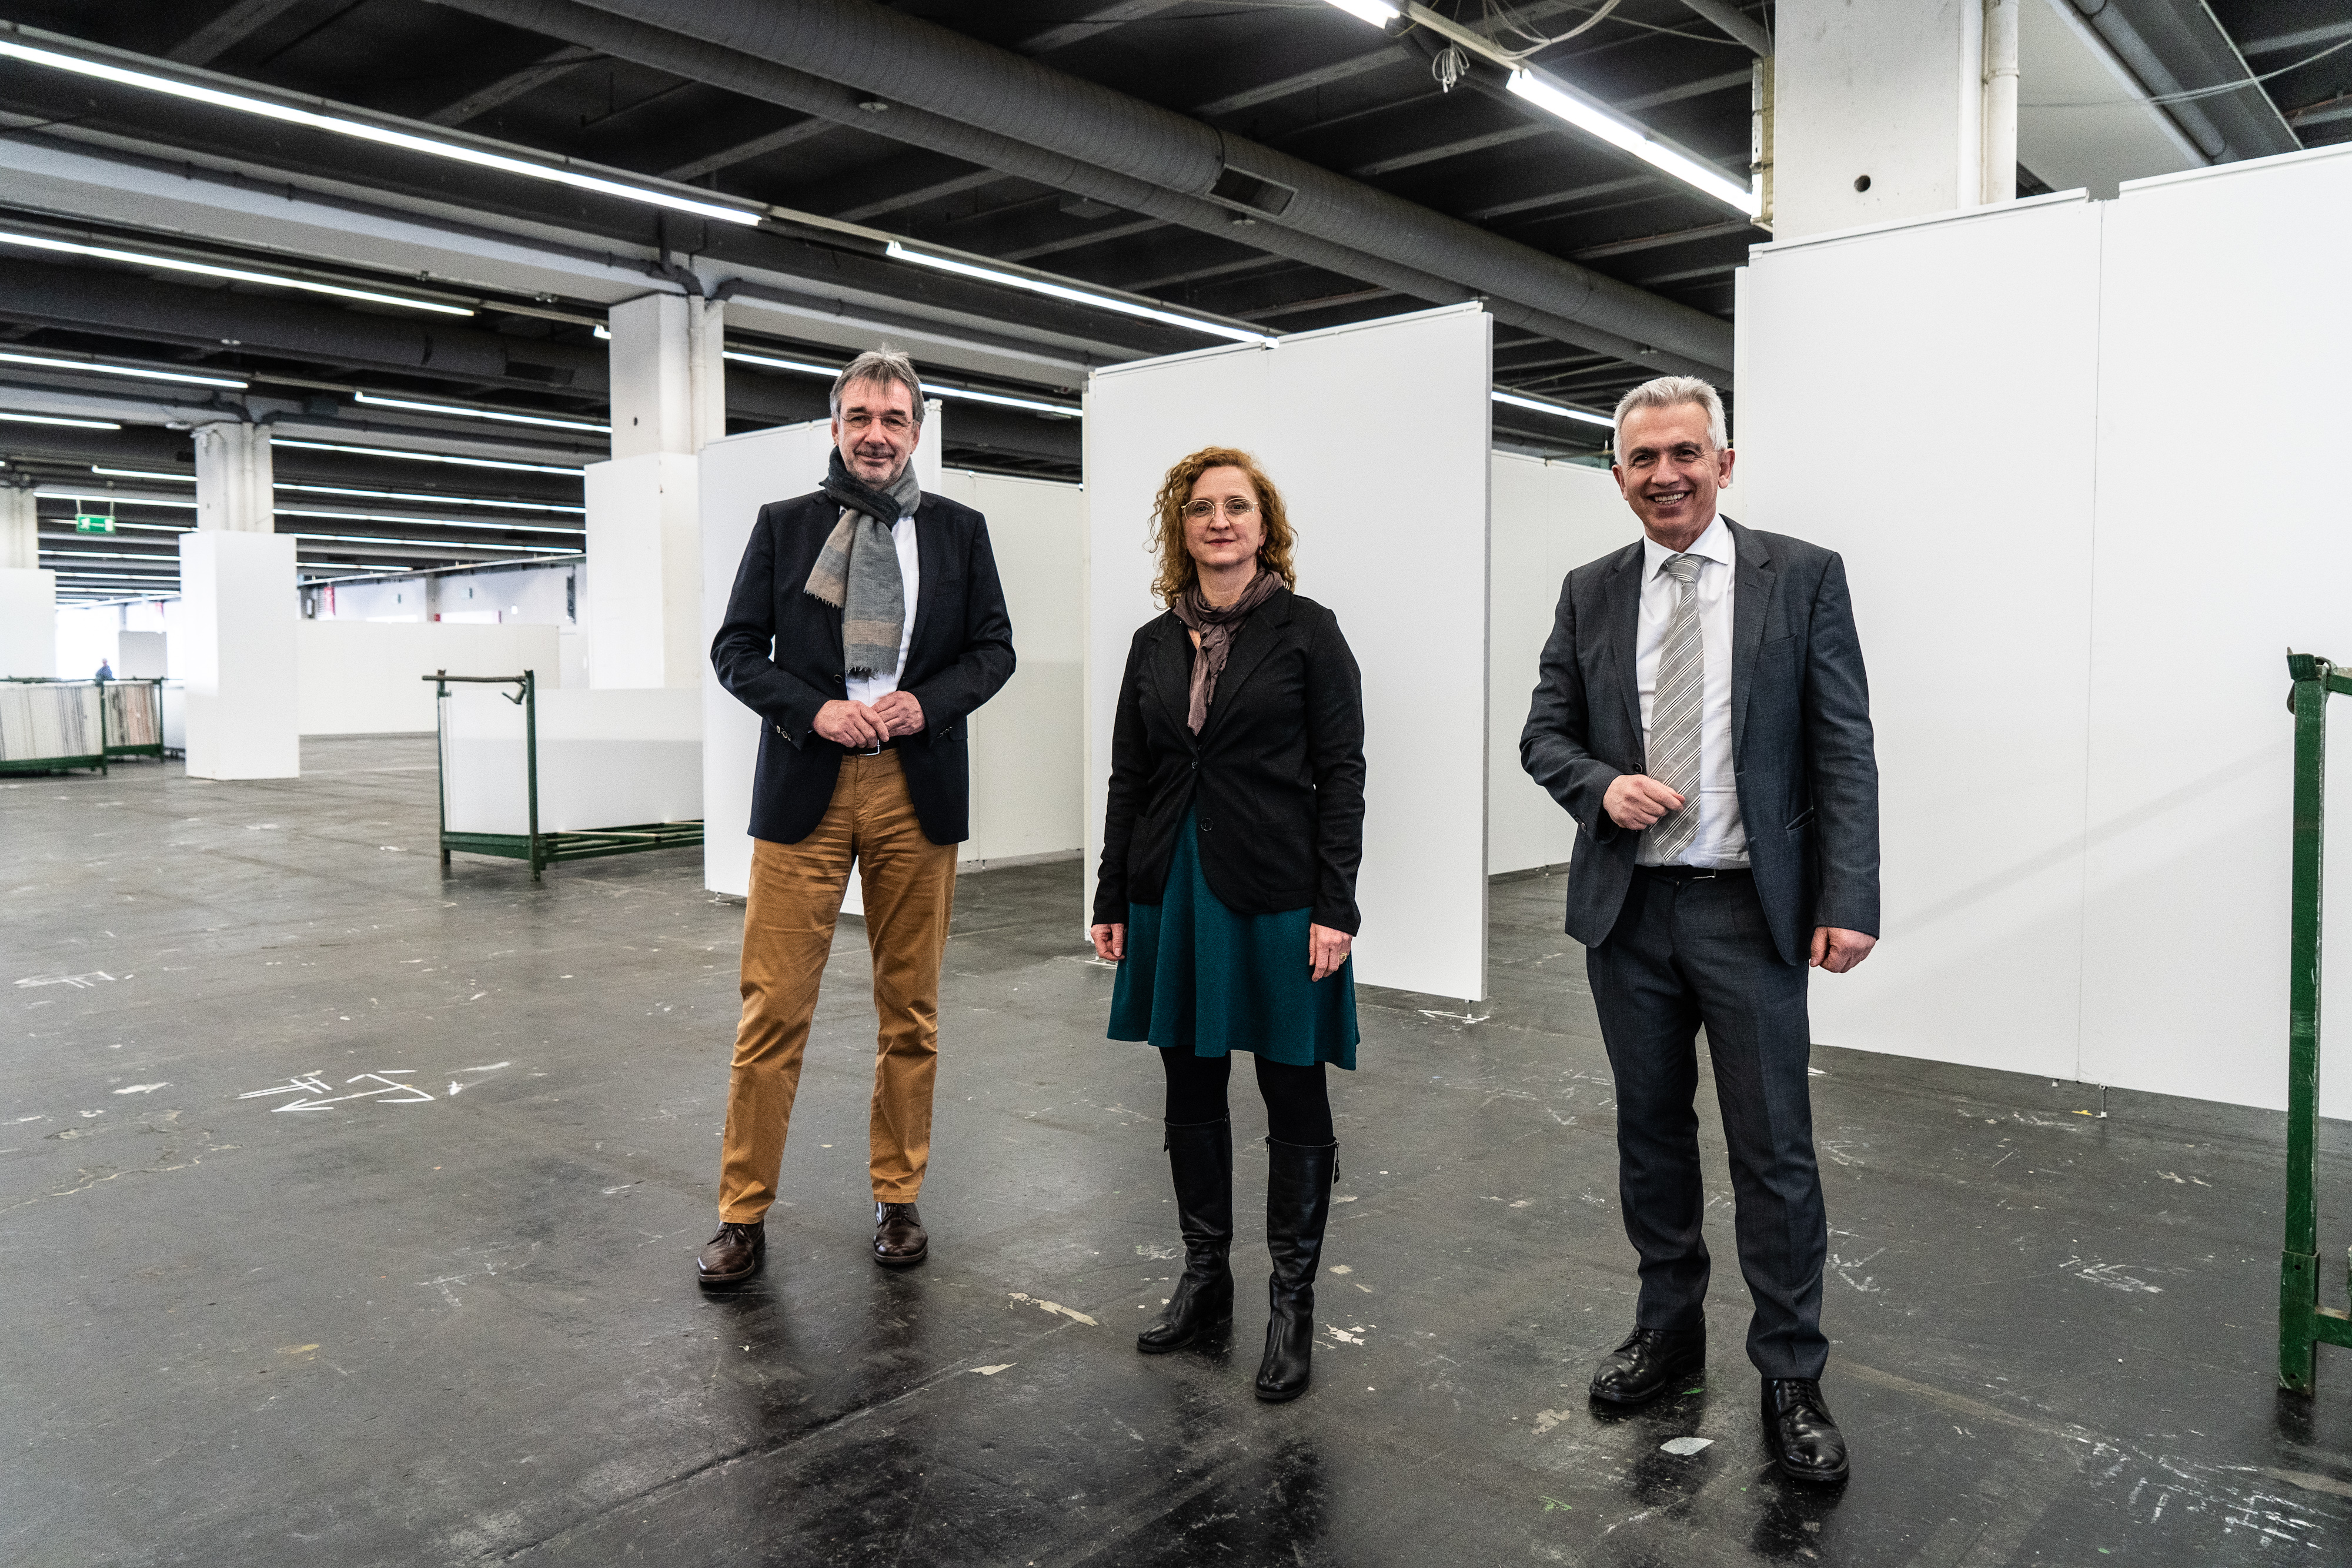 First aid centre in Messe Frankfurt's exhibition hall 1. From left to right: Uwe Behm, Member of the Board of Management of Messe Frankfurt, Elke Voitl, Head of Social Affairs of the City of Frankfurt am Main, Peter Feldmann, Lord Mayor of the City of Frankfurt am Main and Chairman of the Supervisory Board of Messe Frankfurt.